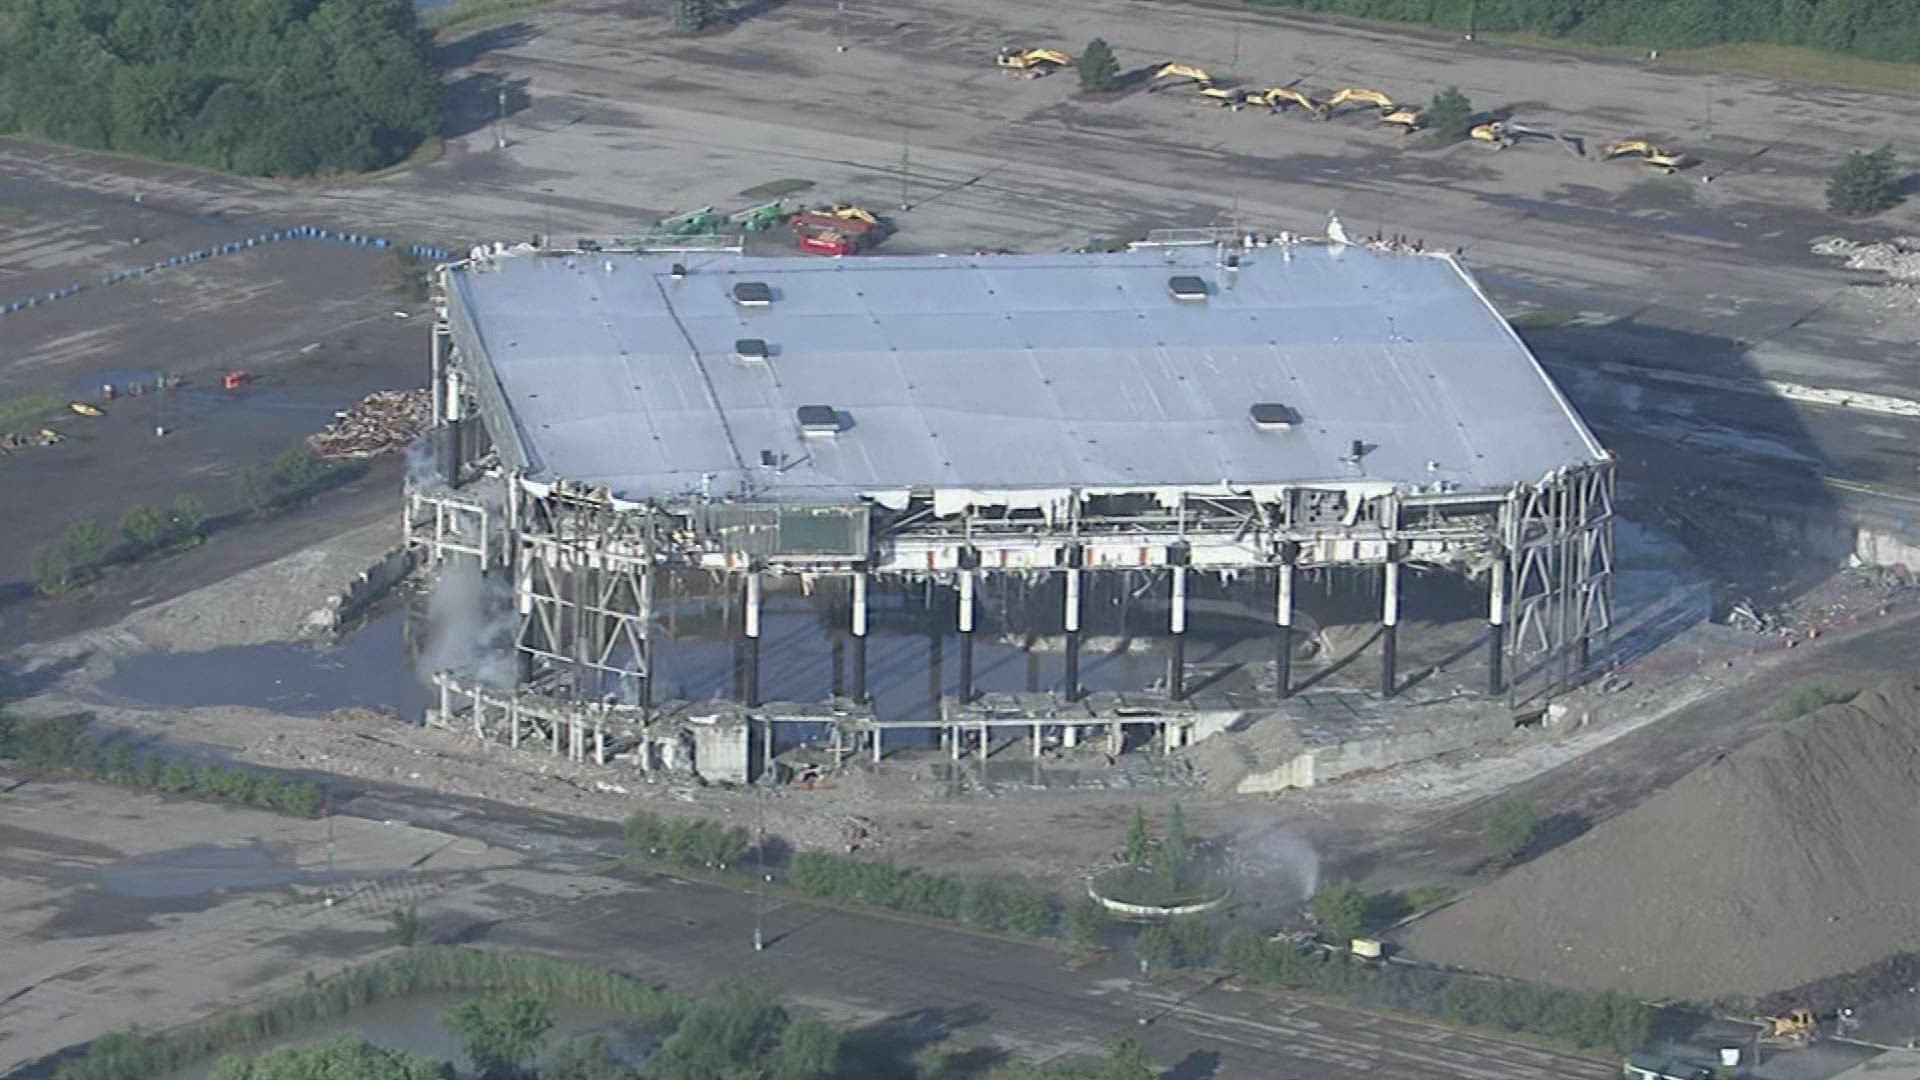 The former home of the Detroit Pistons was imploded Saturday morning.